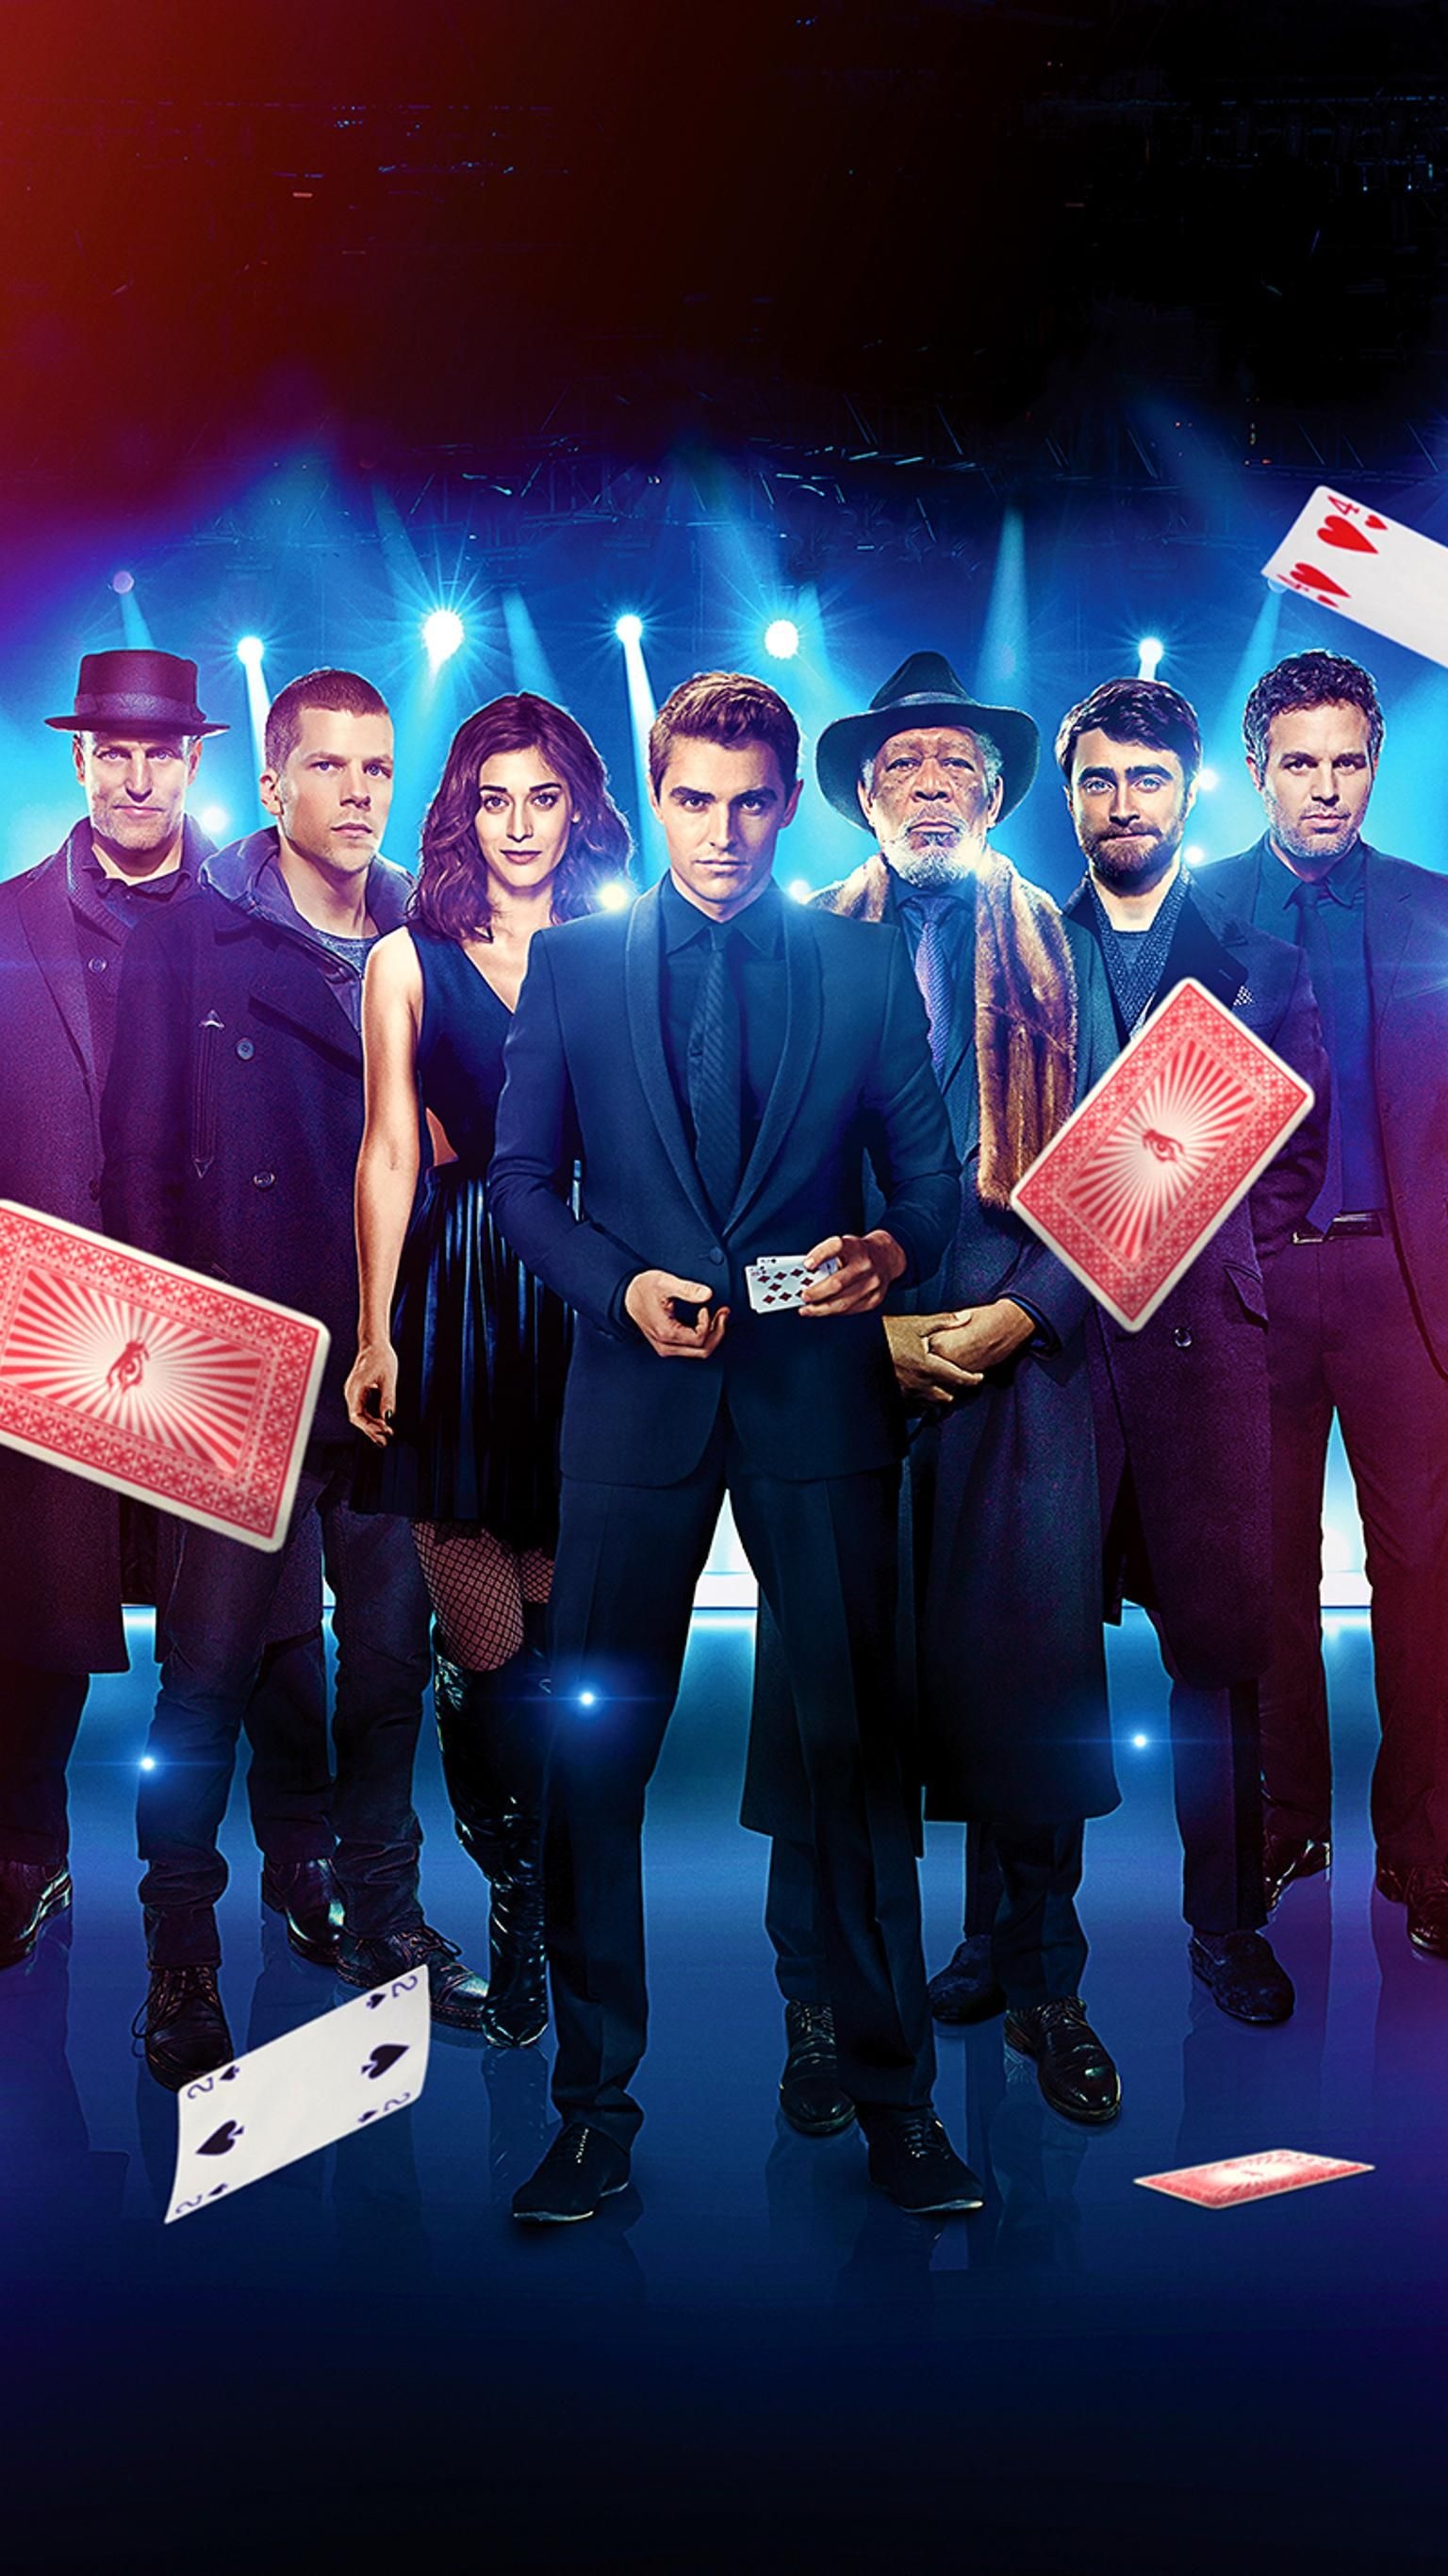 Phone wallpaper, Now You See Me 2, MovieMania app, Free movies online, 1540x2740 HD Phone